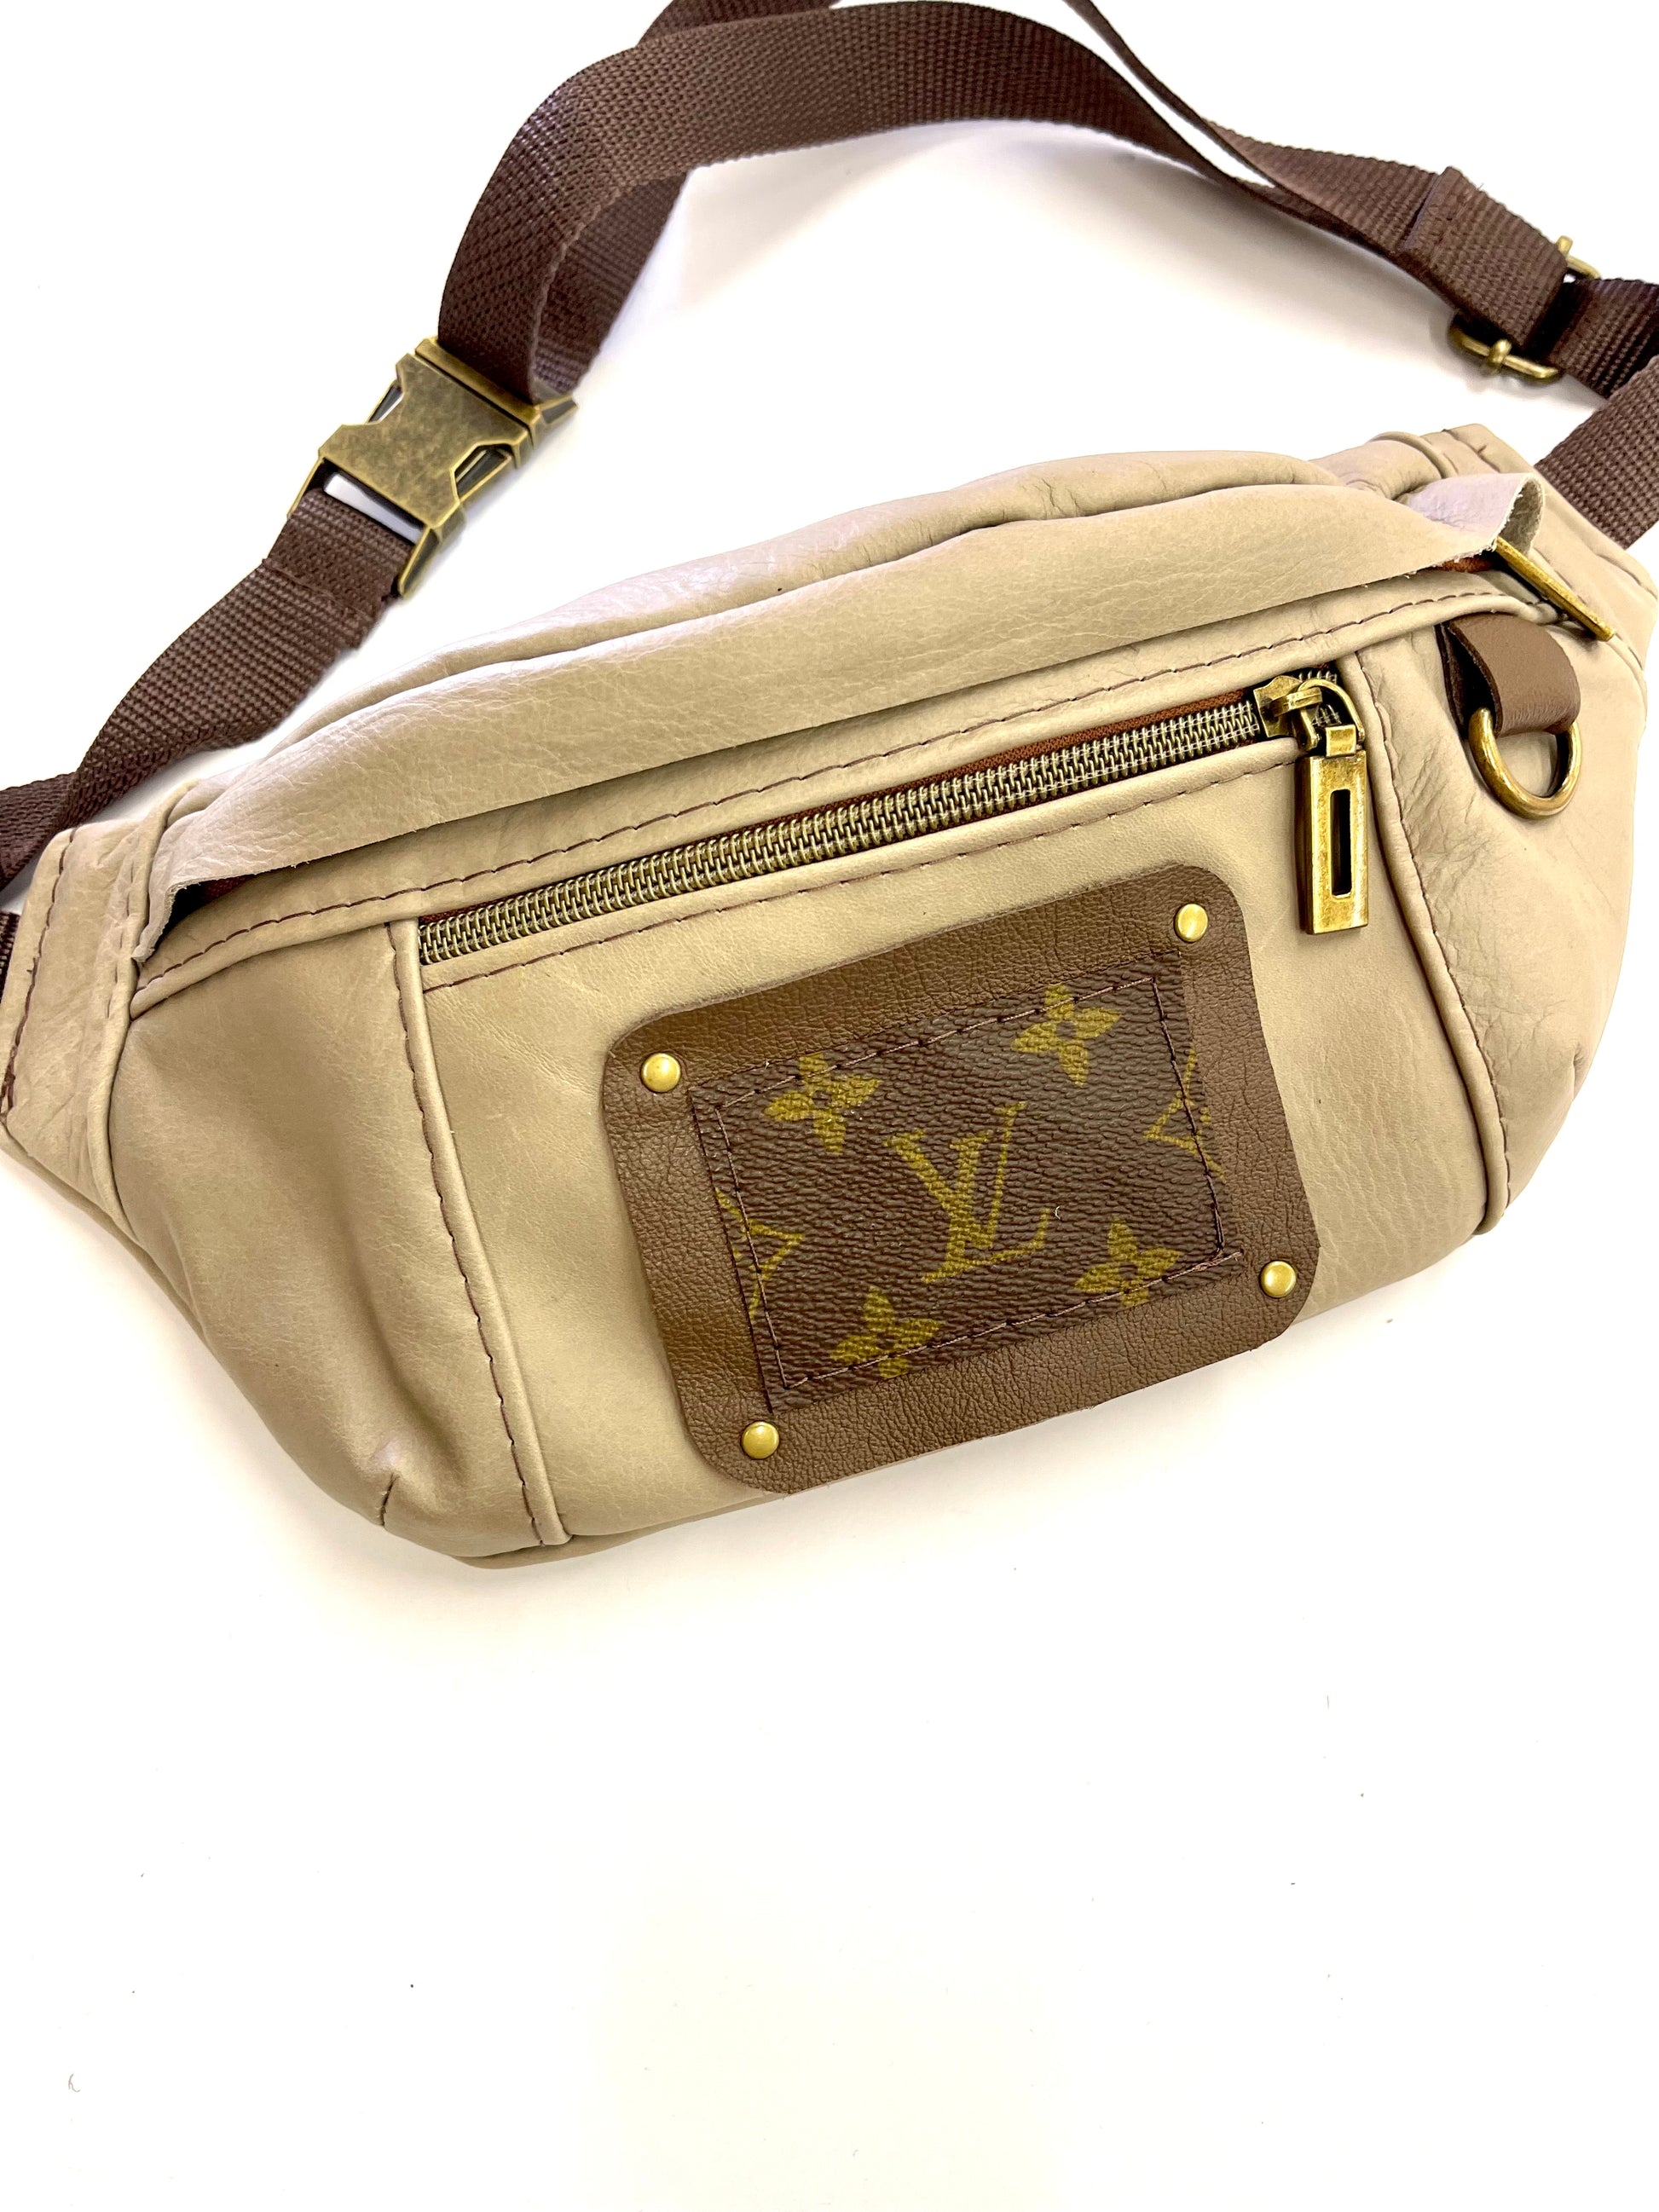 Adjustable Bum Bag PATCH of Lv- Smooth Leathers - Patches Of Upcycling Cream Patches Of Upcycling